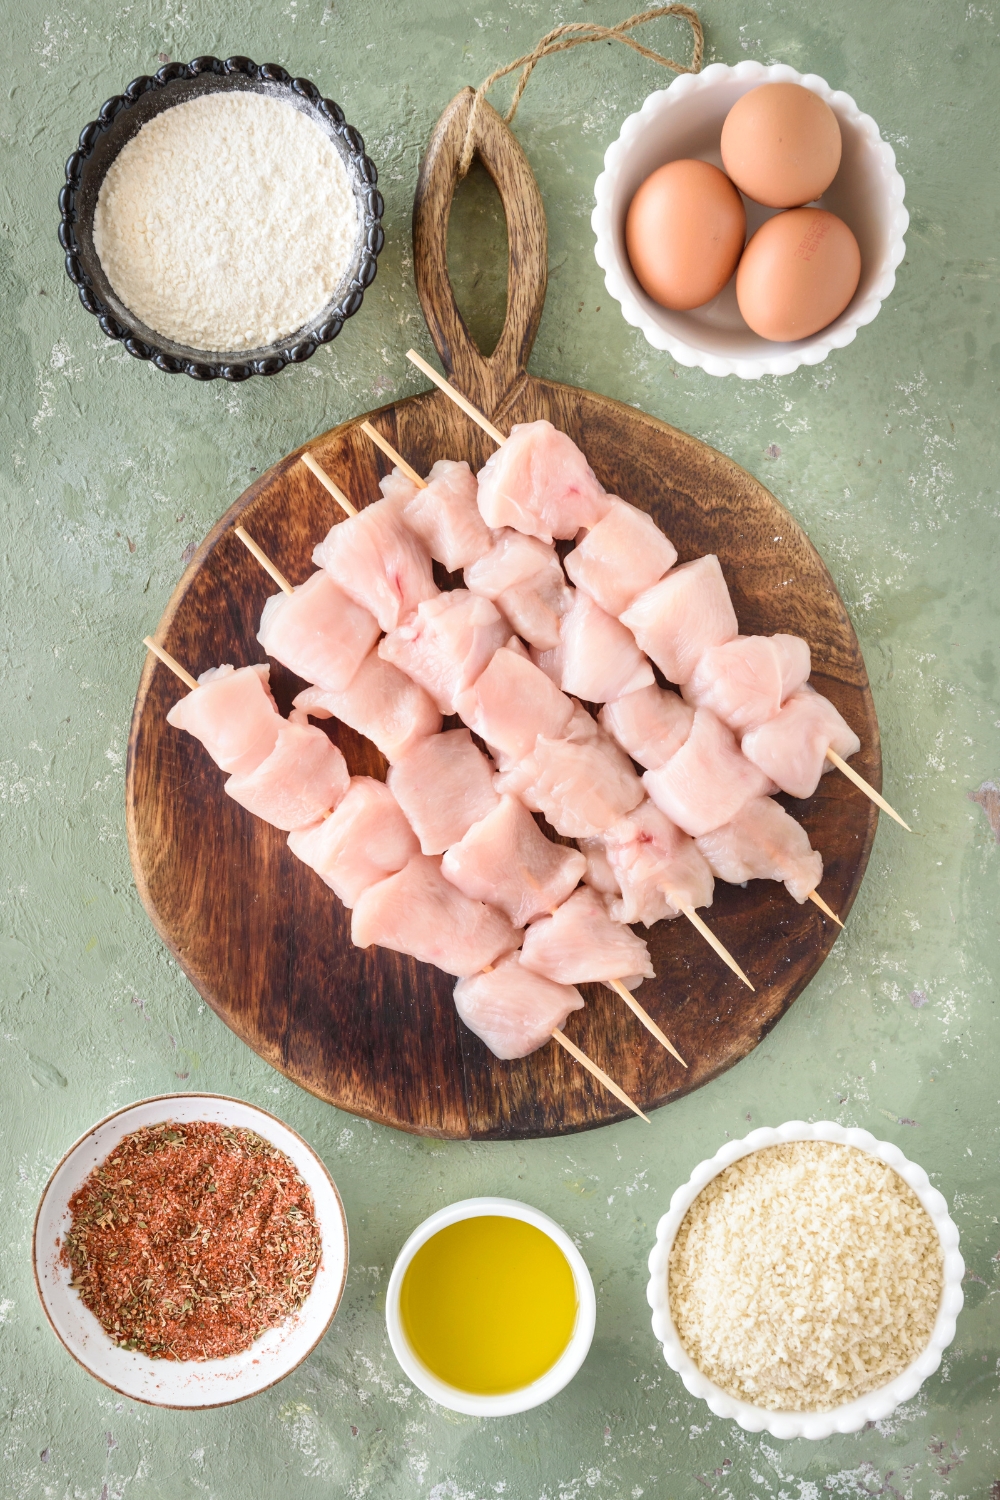 A wooden board filled with raw cubed chicken on skewers, surrounded by bowls of ingredients including eggs, oil, breadcrumbs, and seasoning.